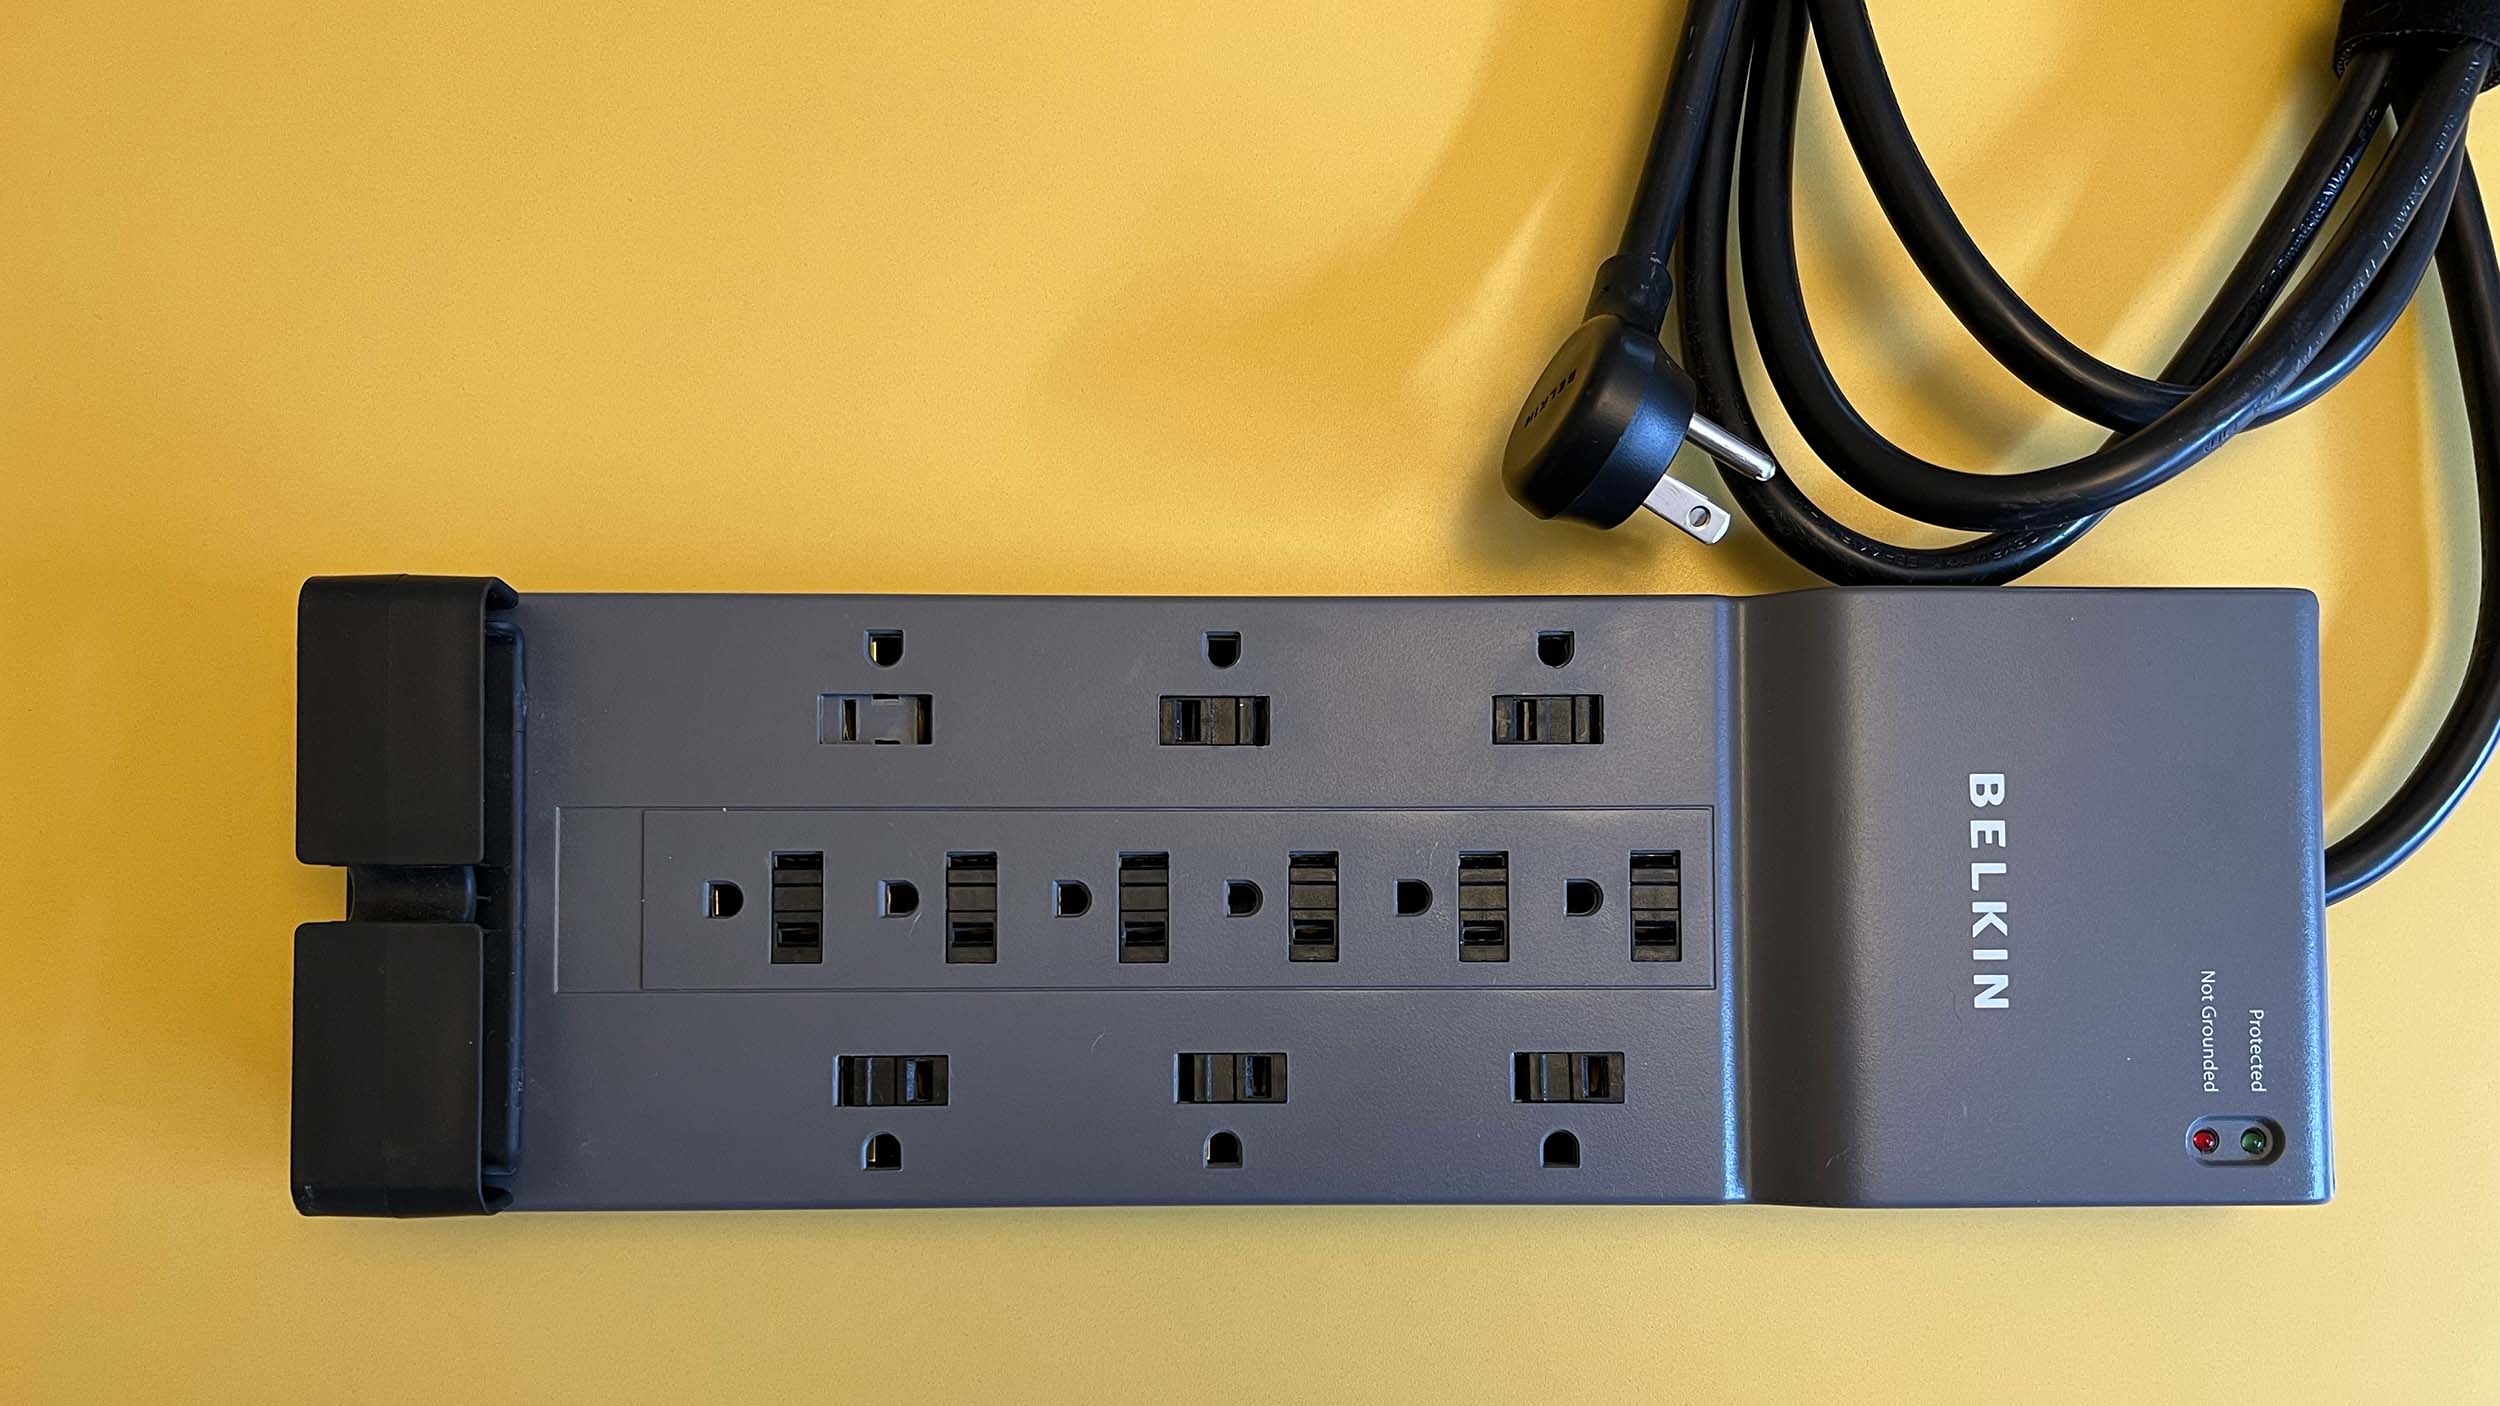 BELKIN Surge Protection with USB C 8 Outlet